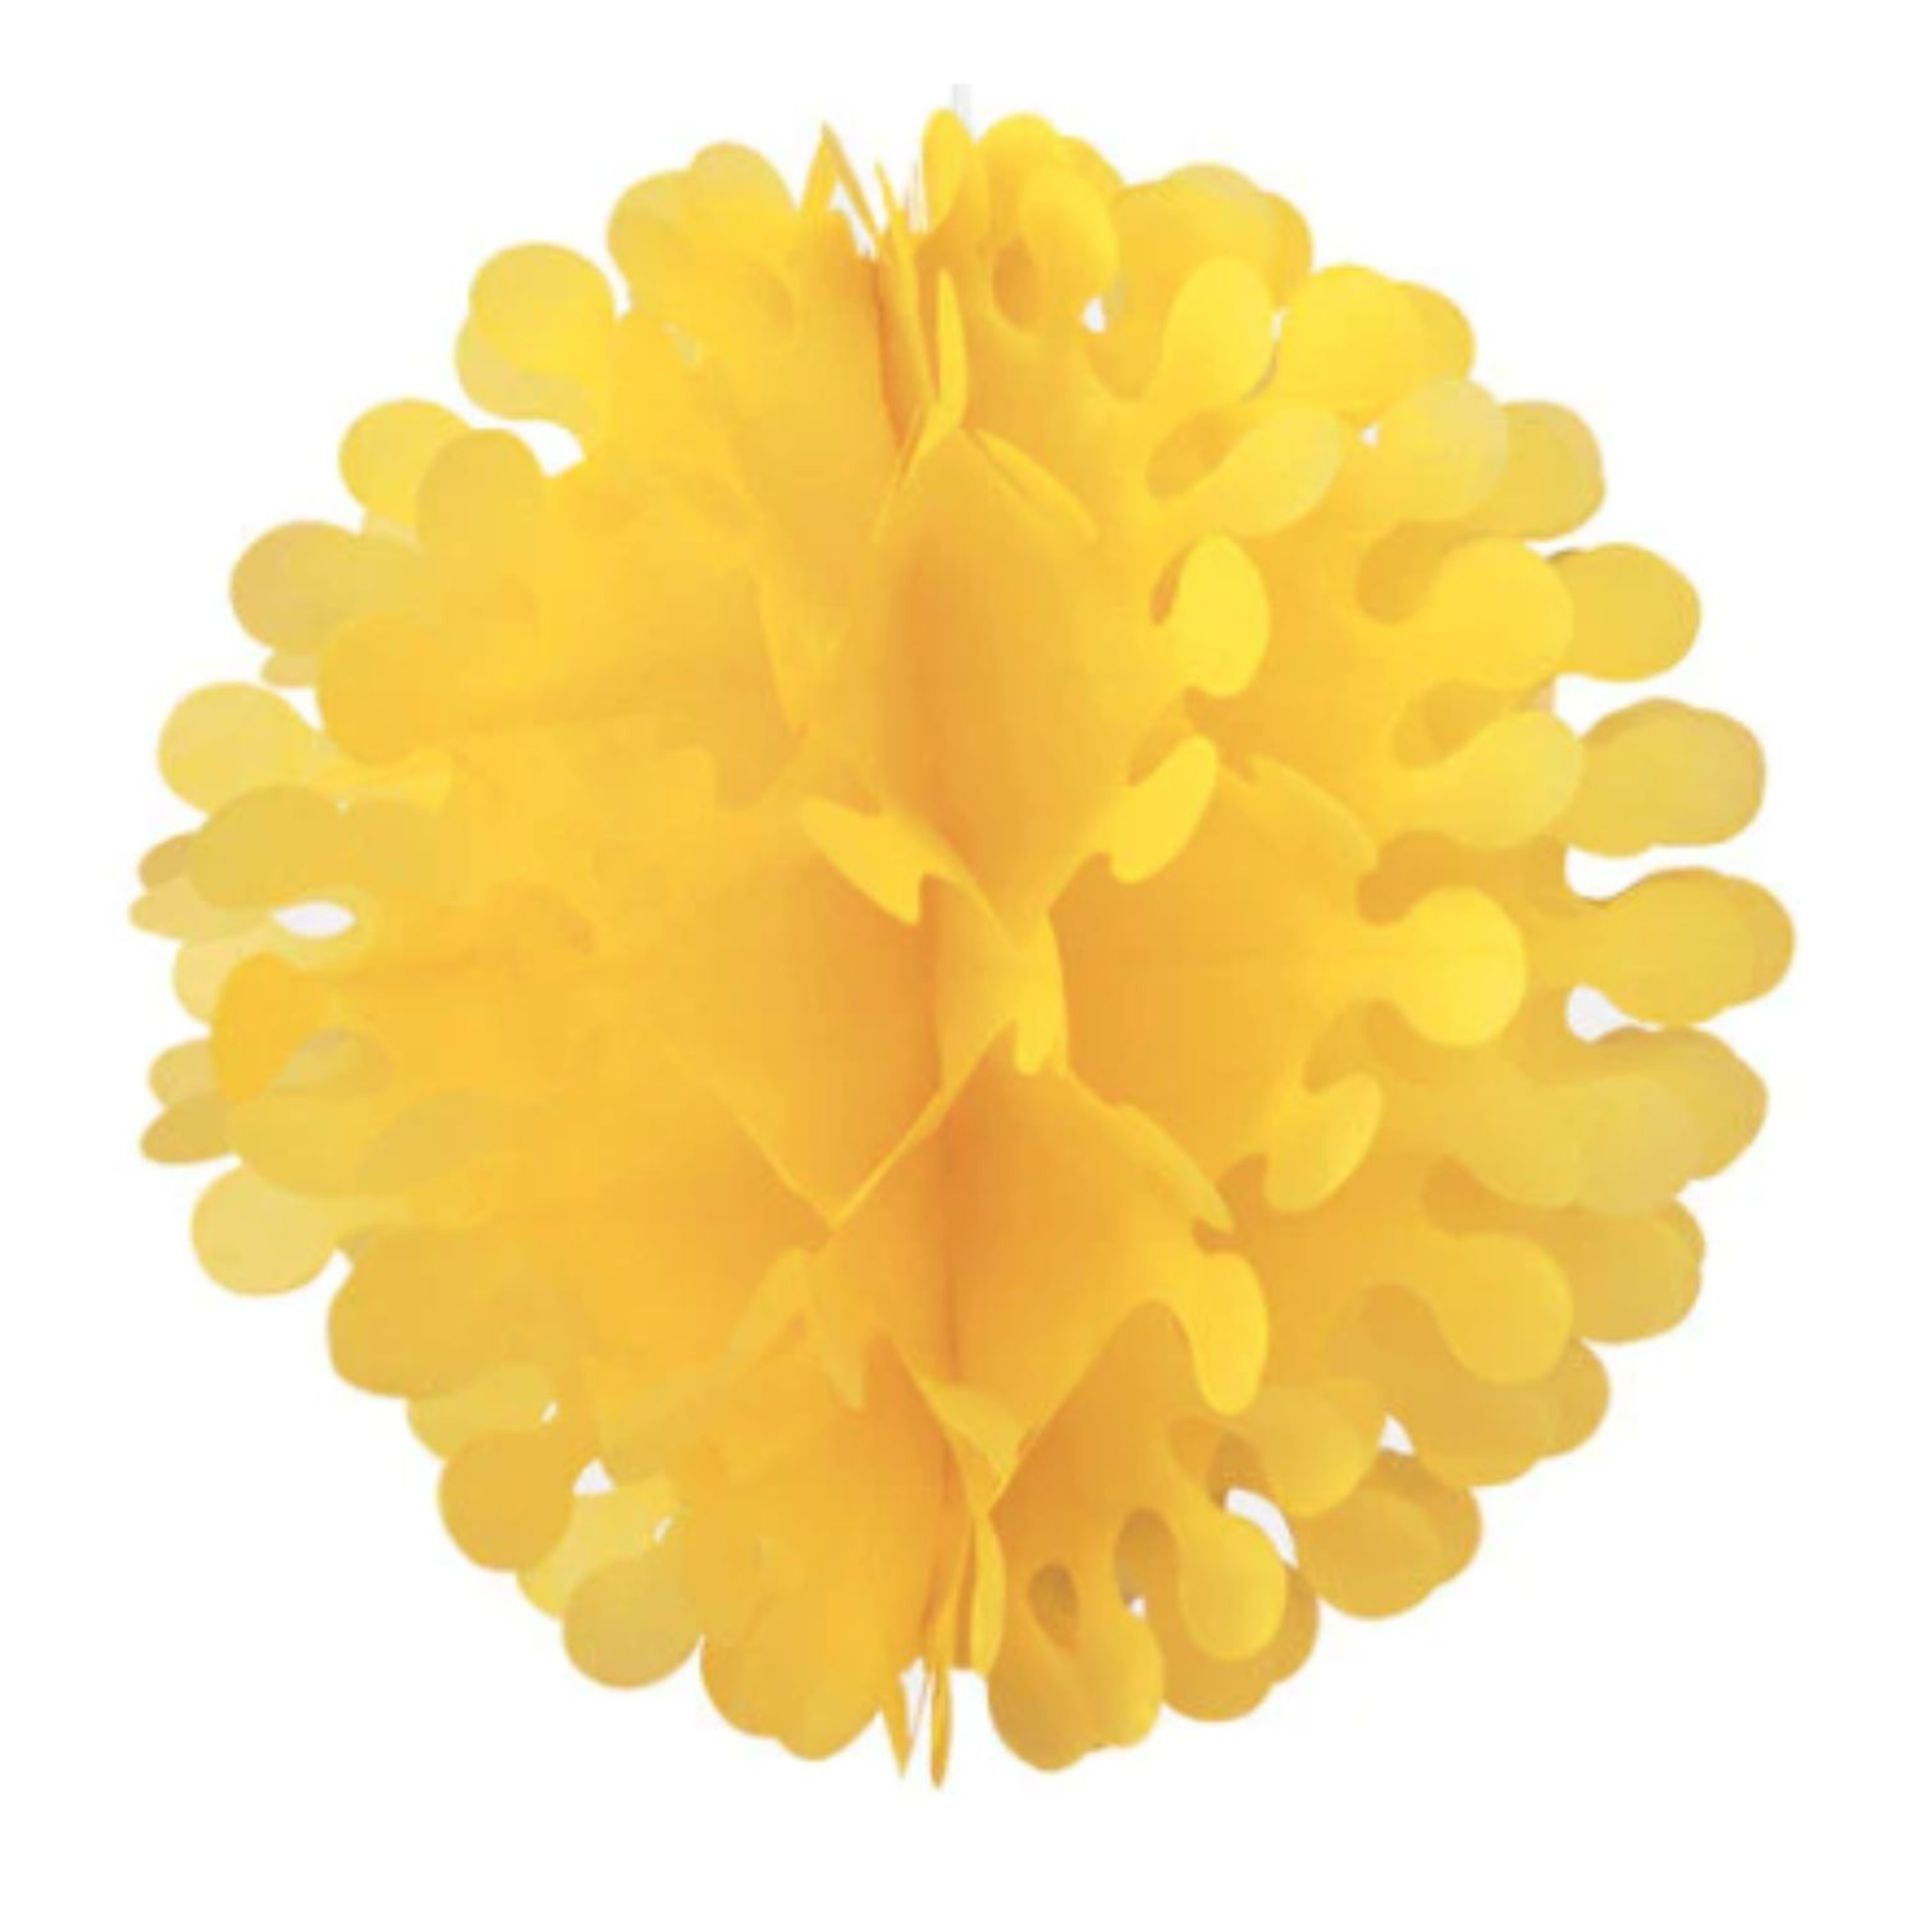 1000 PARTY SUPPLIES 12" FLUTTER TISSUE PAPER BALL - RANGE OF COLOURS, RRP £10,000 - Image 8 of 9